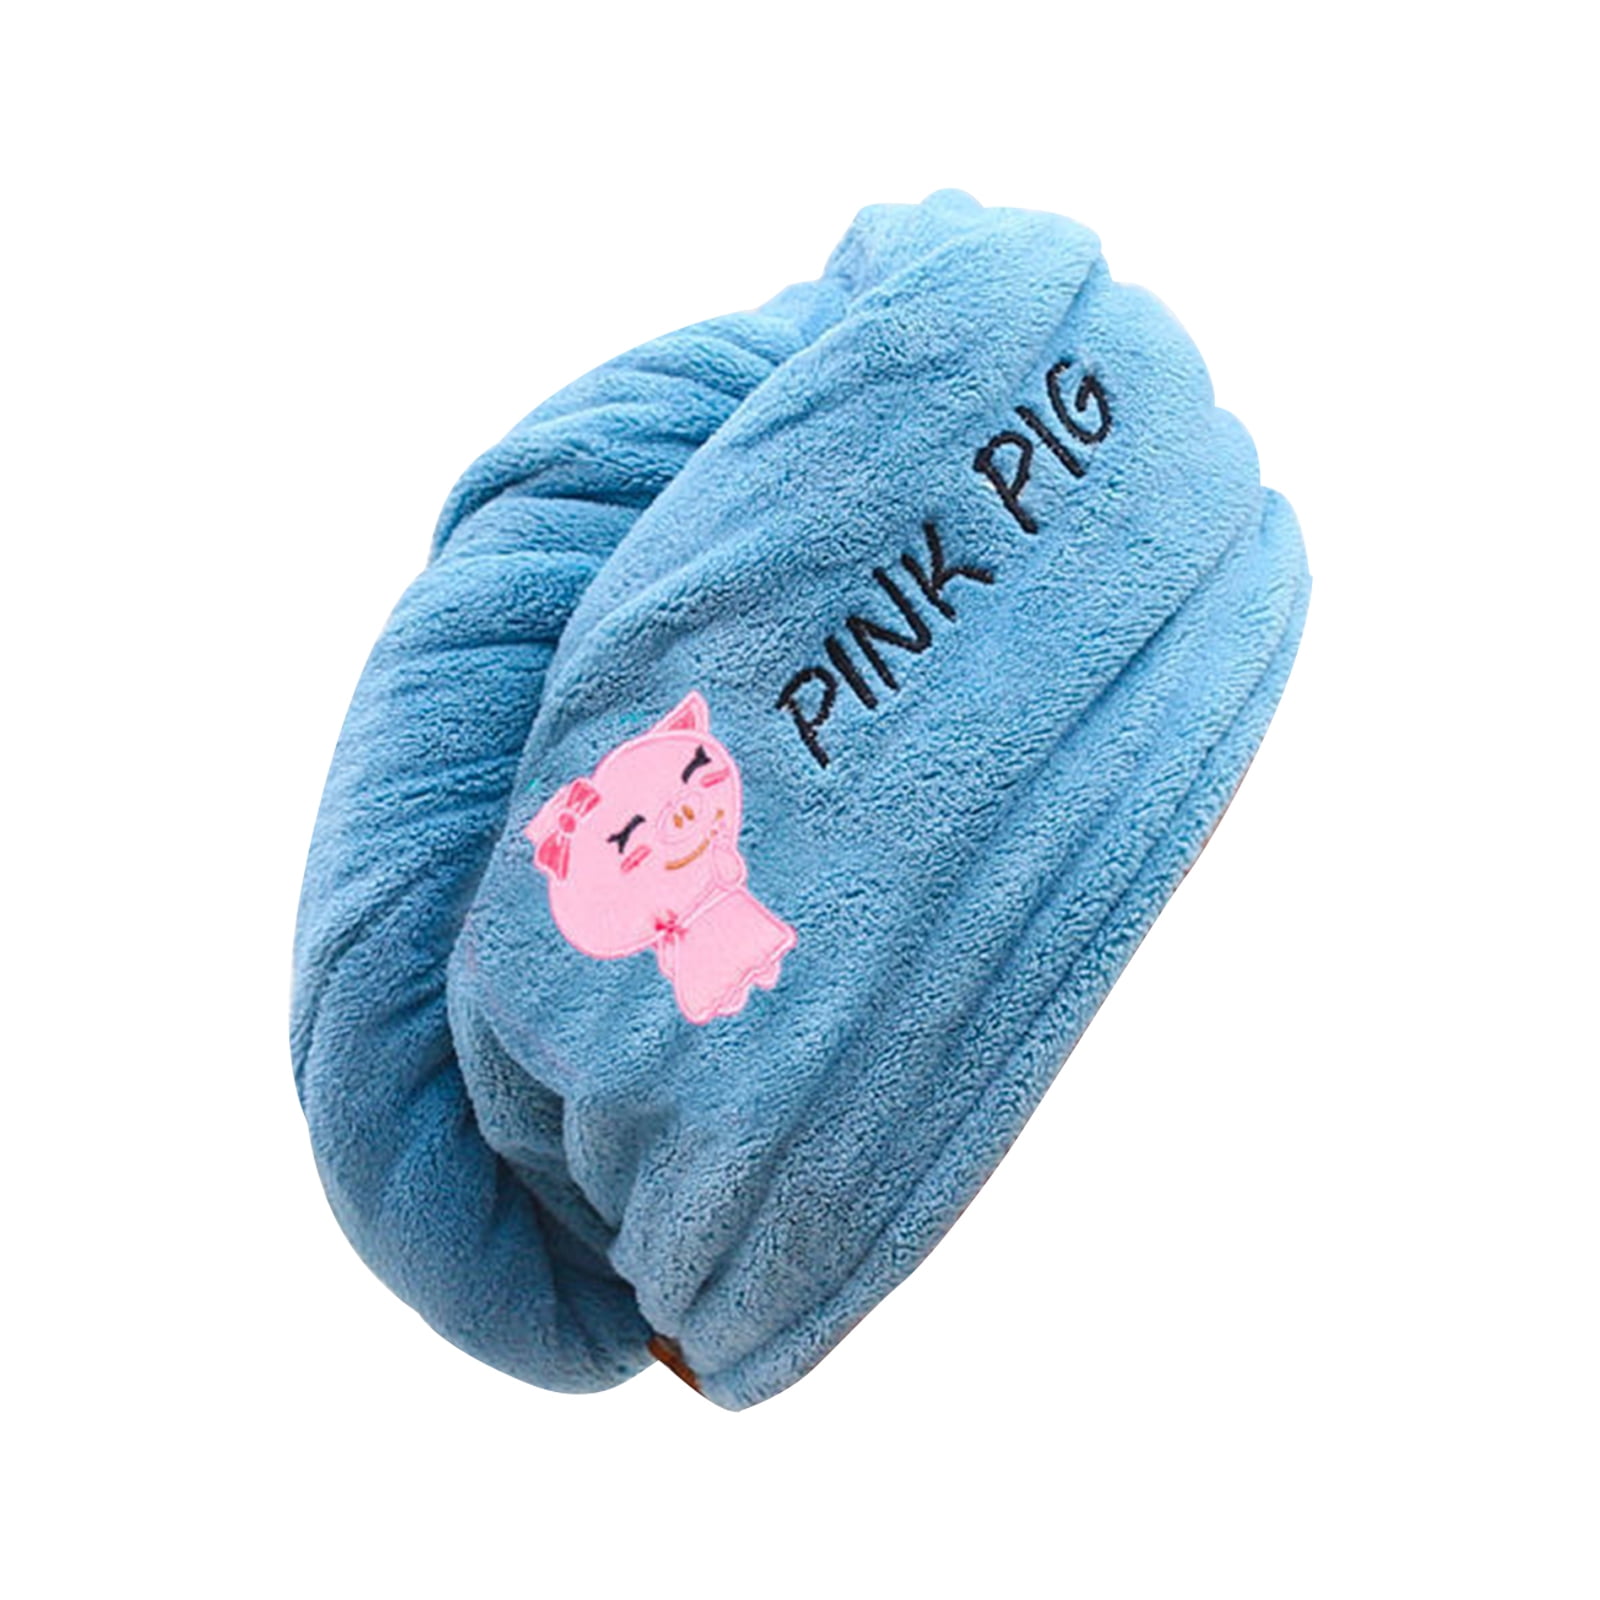 Techinal Hair Towel Wrap for Women Soft Coral Fleece Hair Drying Hat Bath  Towels Super Absorbent Quick Dry Hair Turban for Drying Curly Long Thick  Hair 